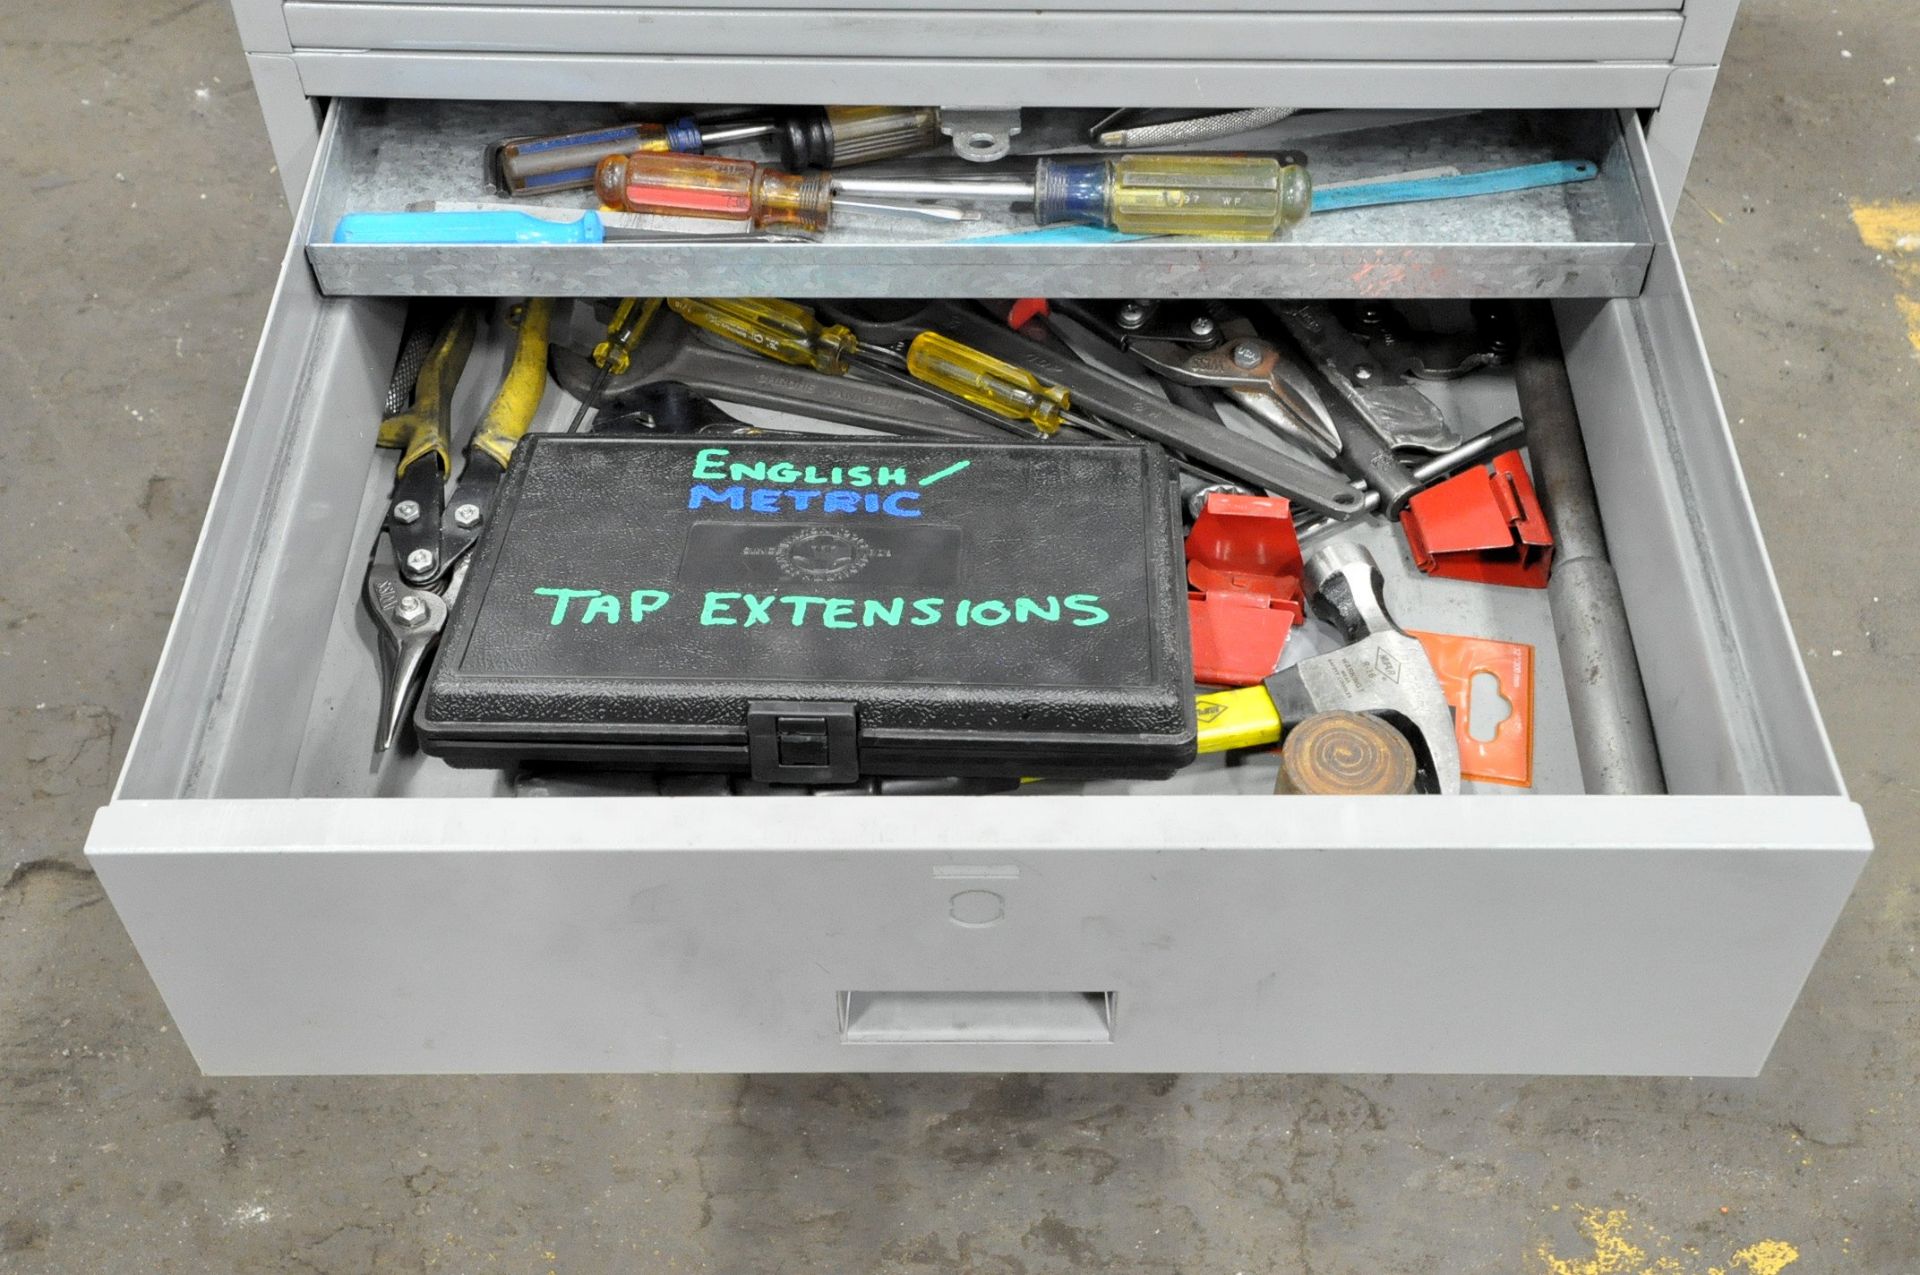 4-Drawer Rolling Cabinet with Misc. Tools Contents, (E-7), (Yellow Tag) - Image 4 of 5